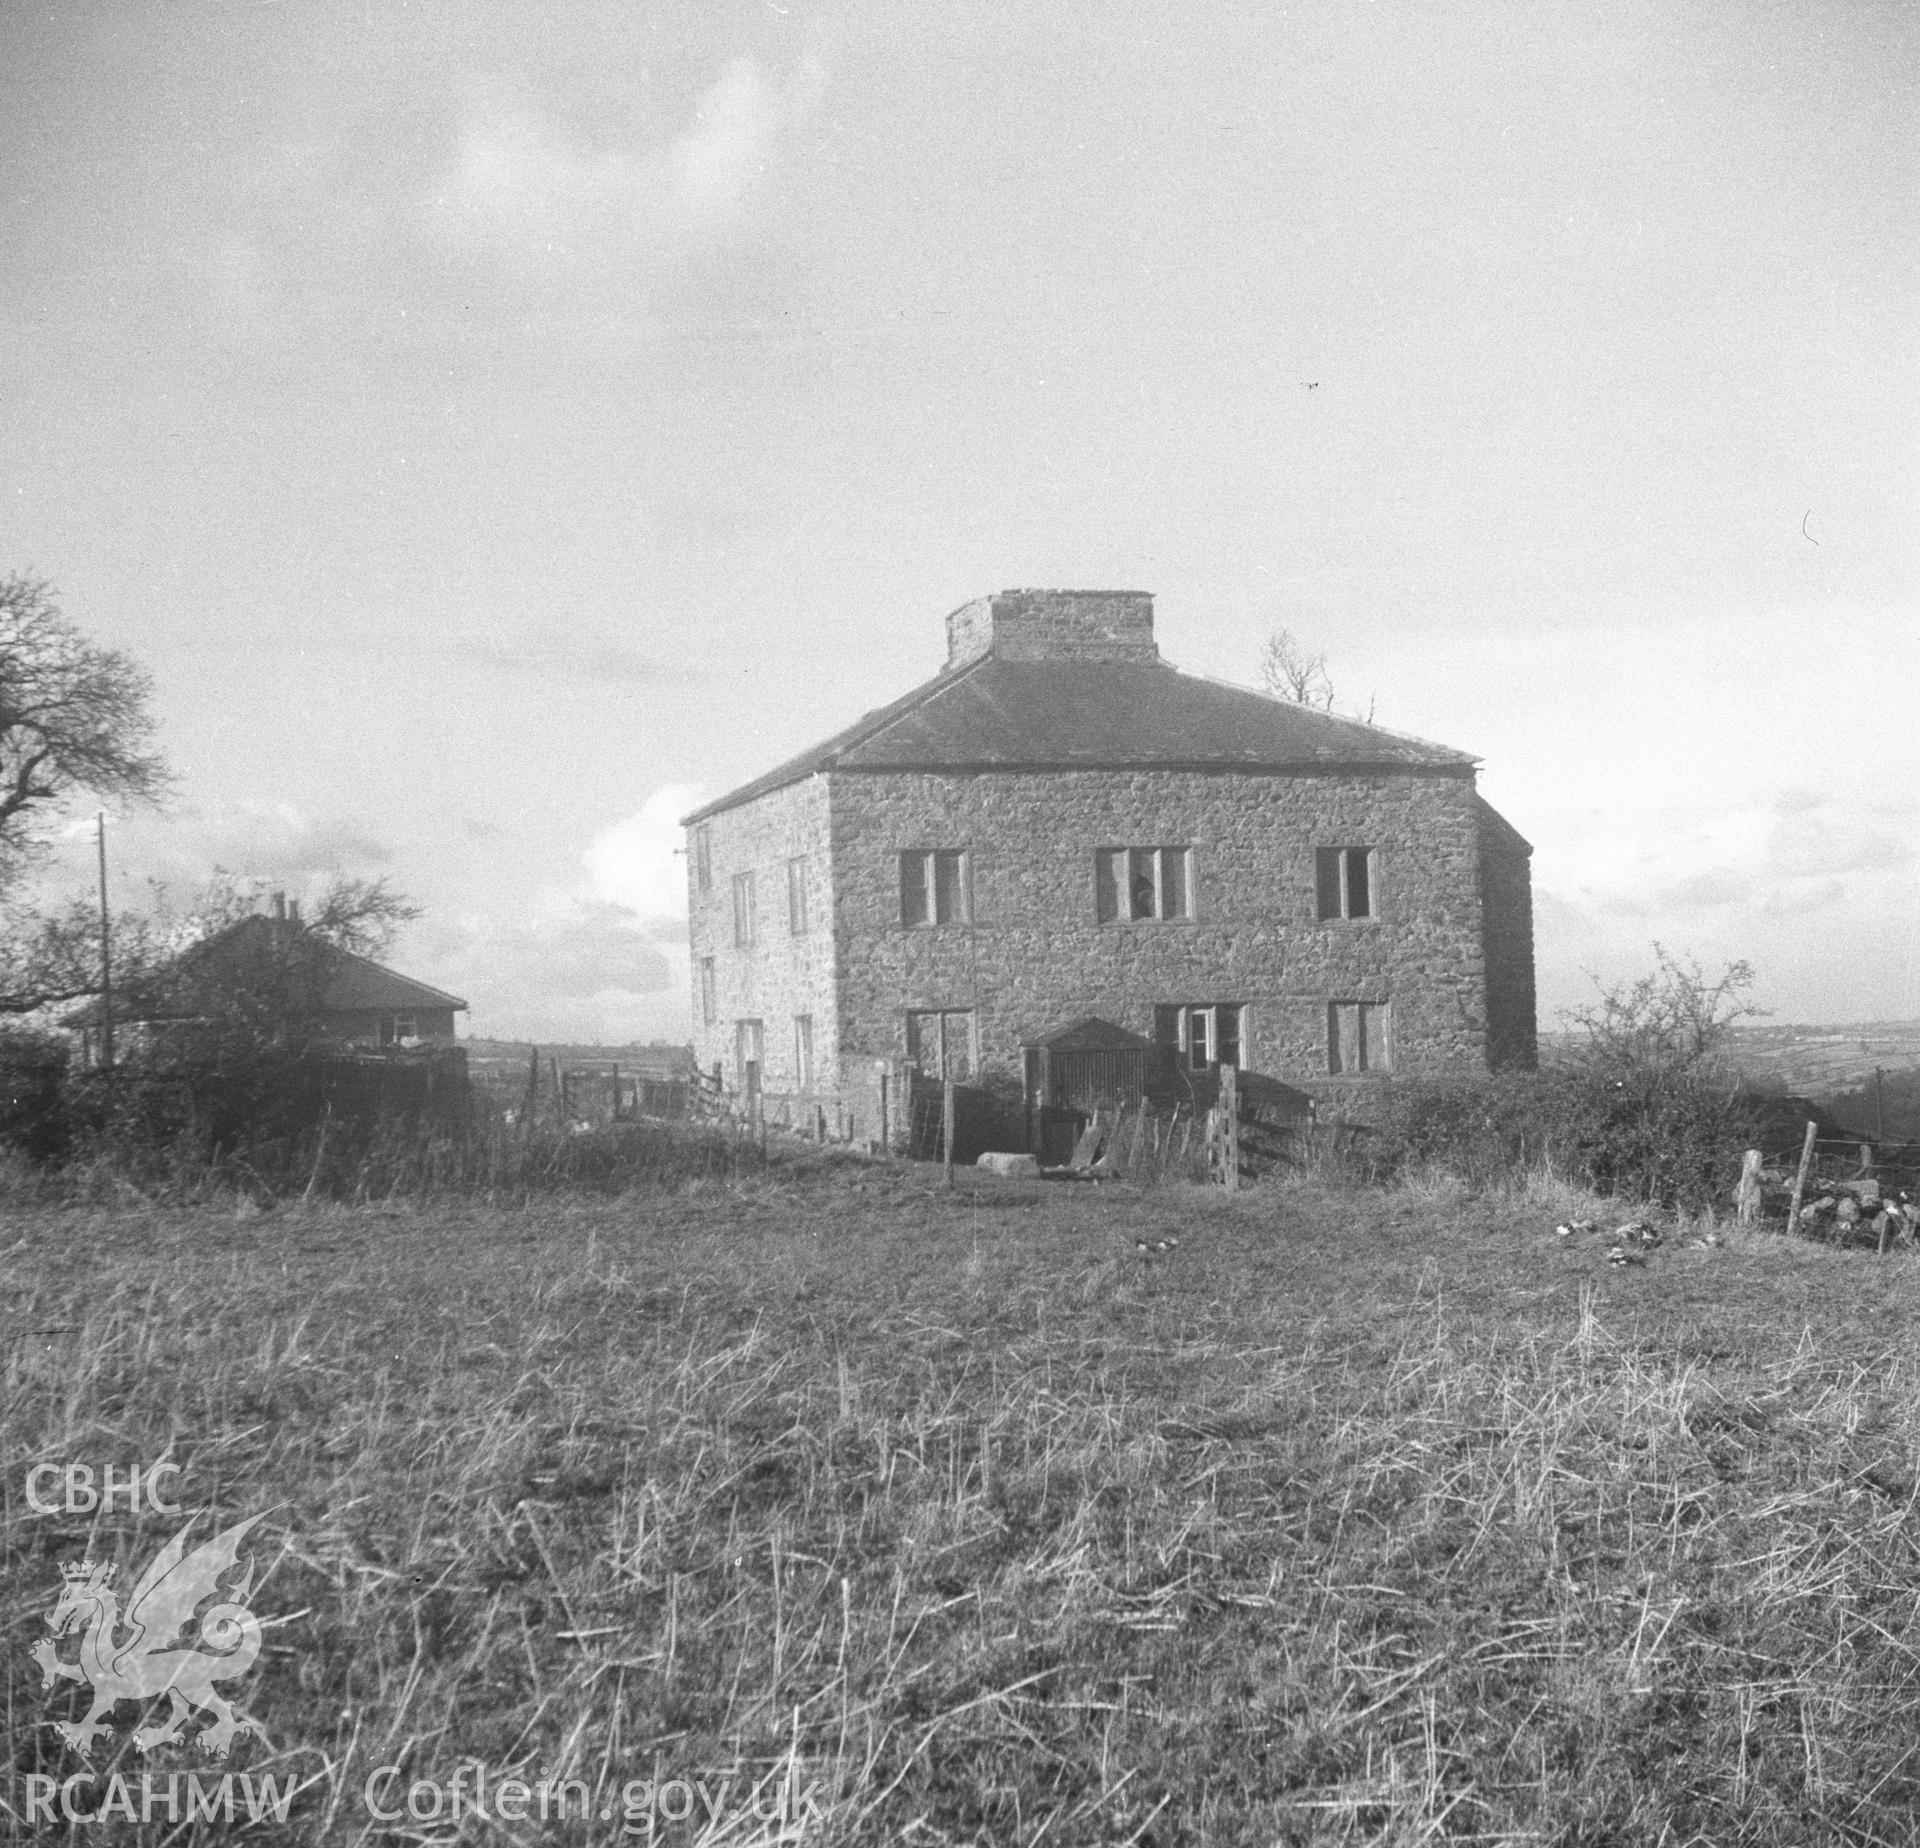 Black and white acetate negative showing exterior view of Trimley Hall, Llanfynydd.